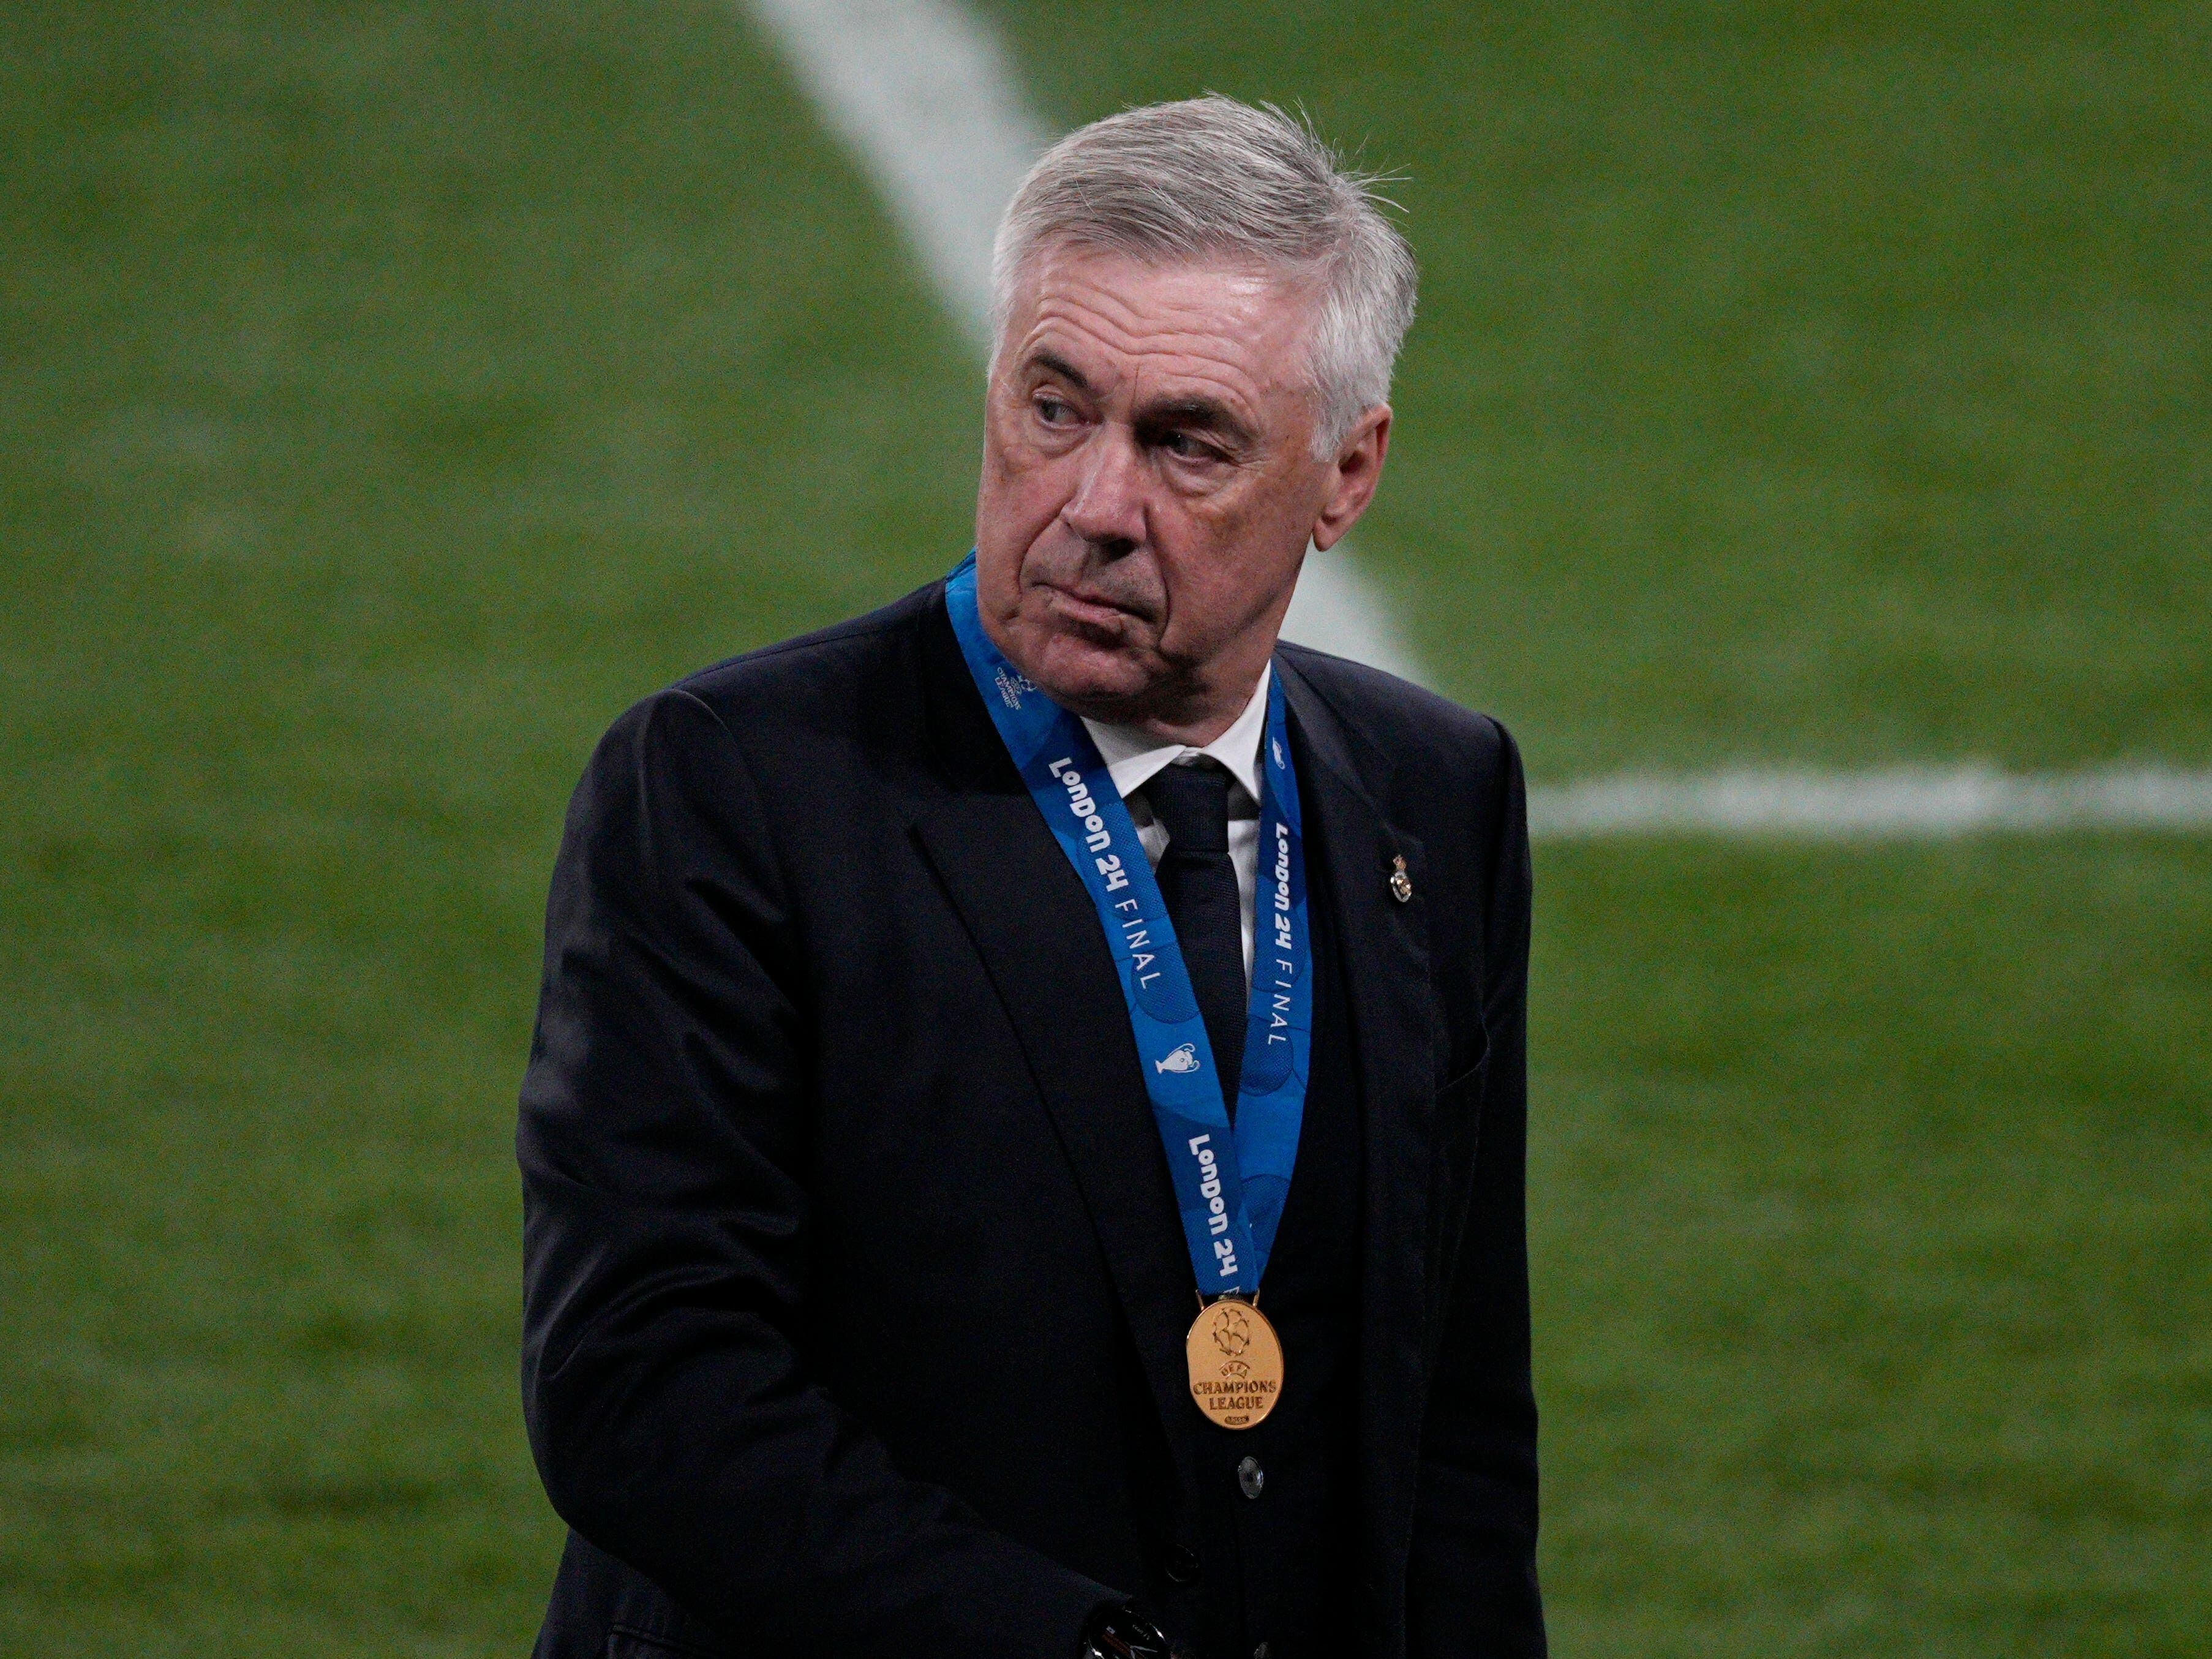 Real Madrid will play in expanded Club World Cup after Carlo Ancelotti misquoted